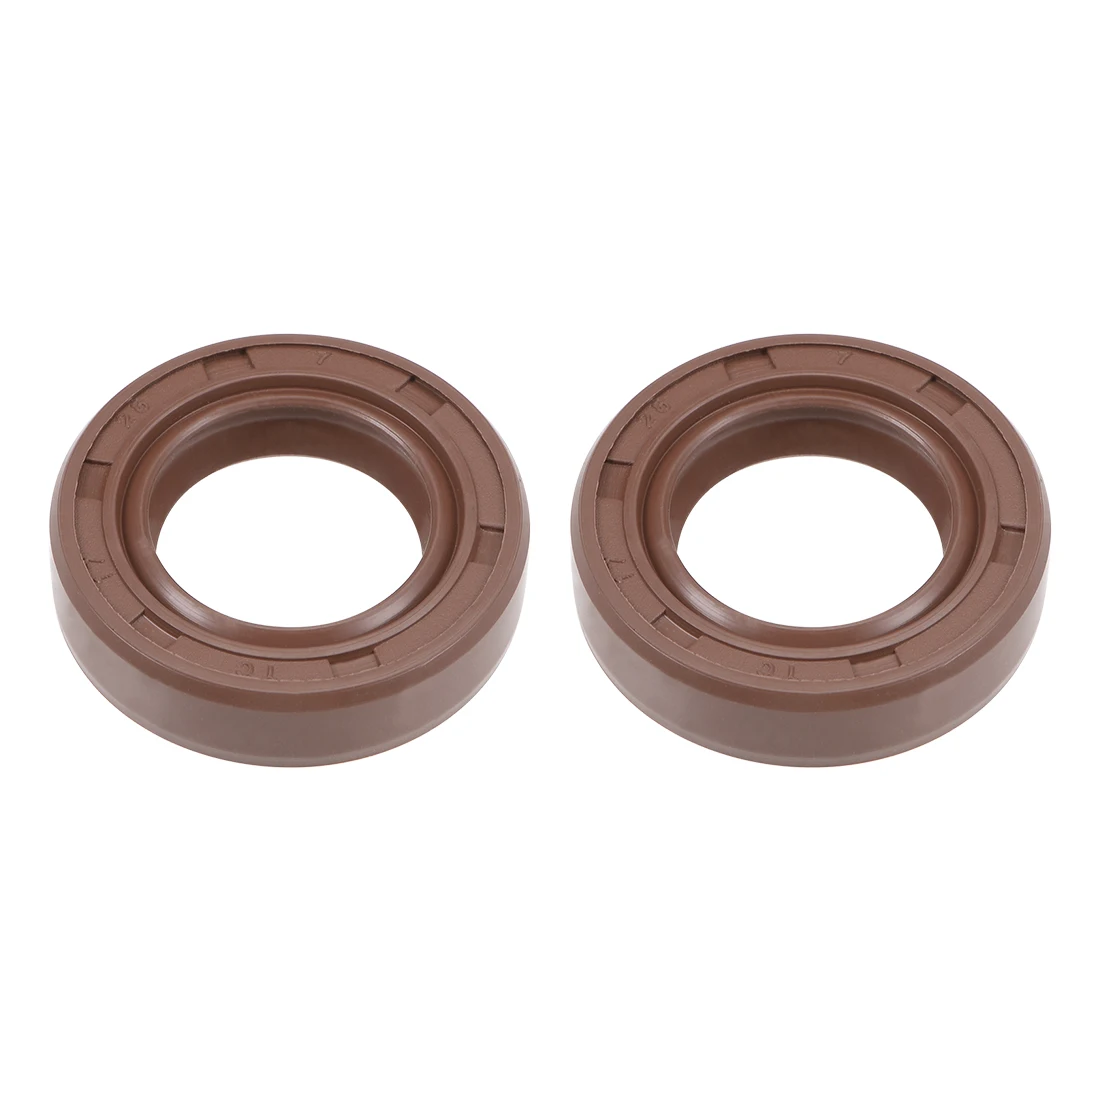 uxcell Oil Seal 40mm Inner Dia 50mm OD 7mm Thick Fluorine Rubber Double Lip Seals 2Pcs